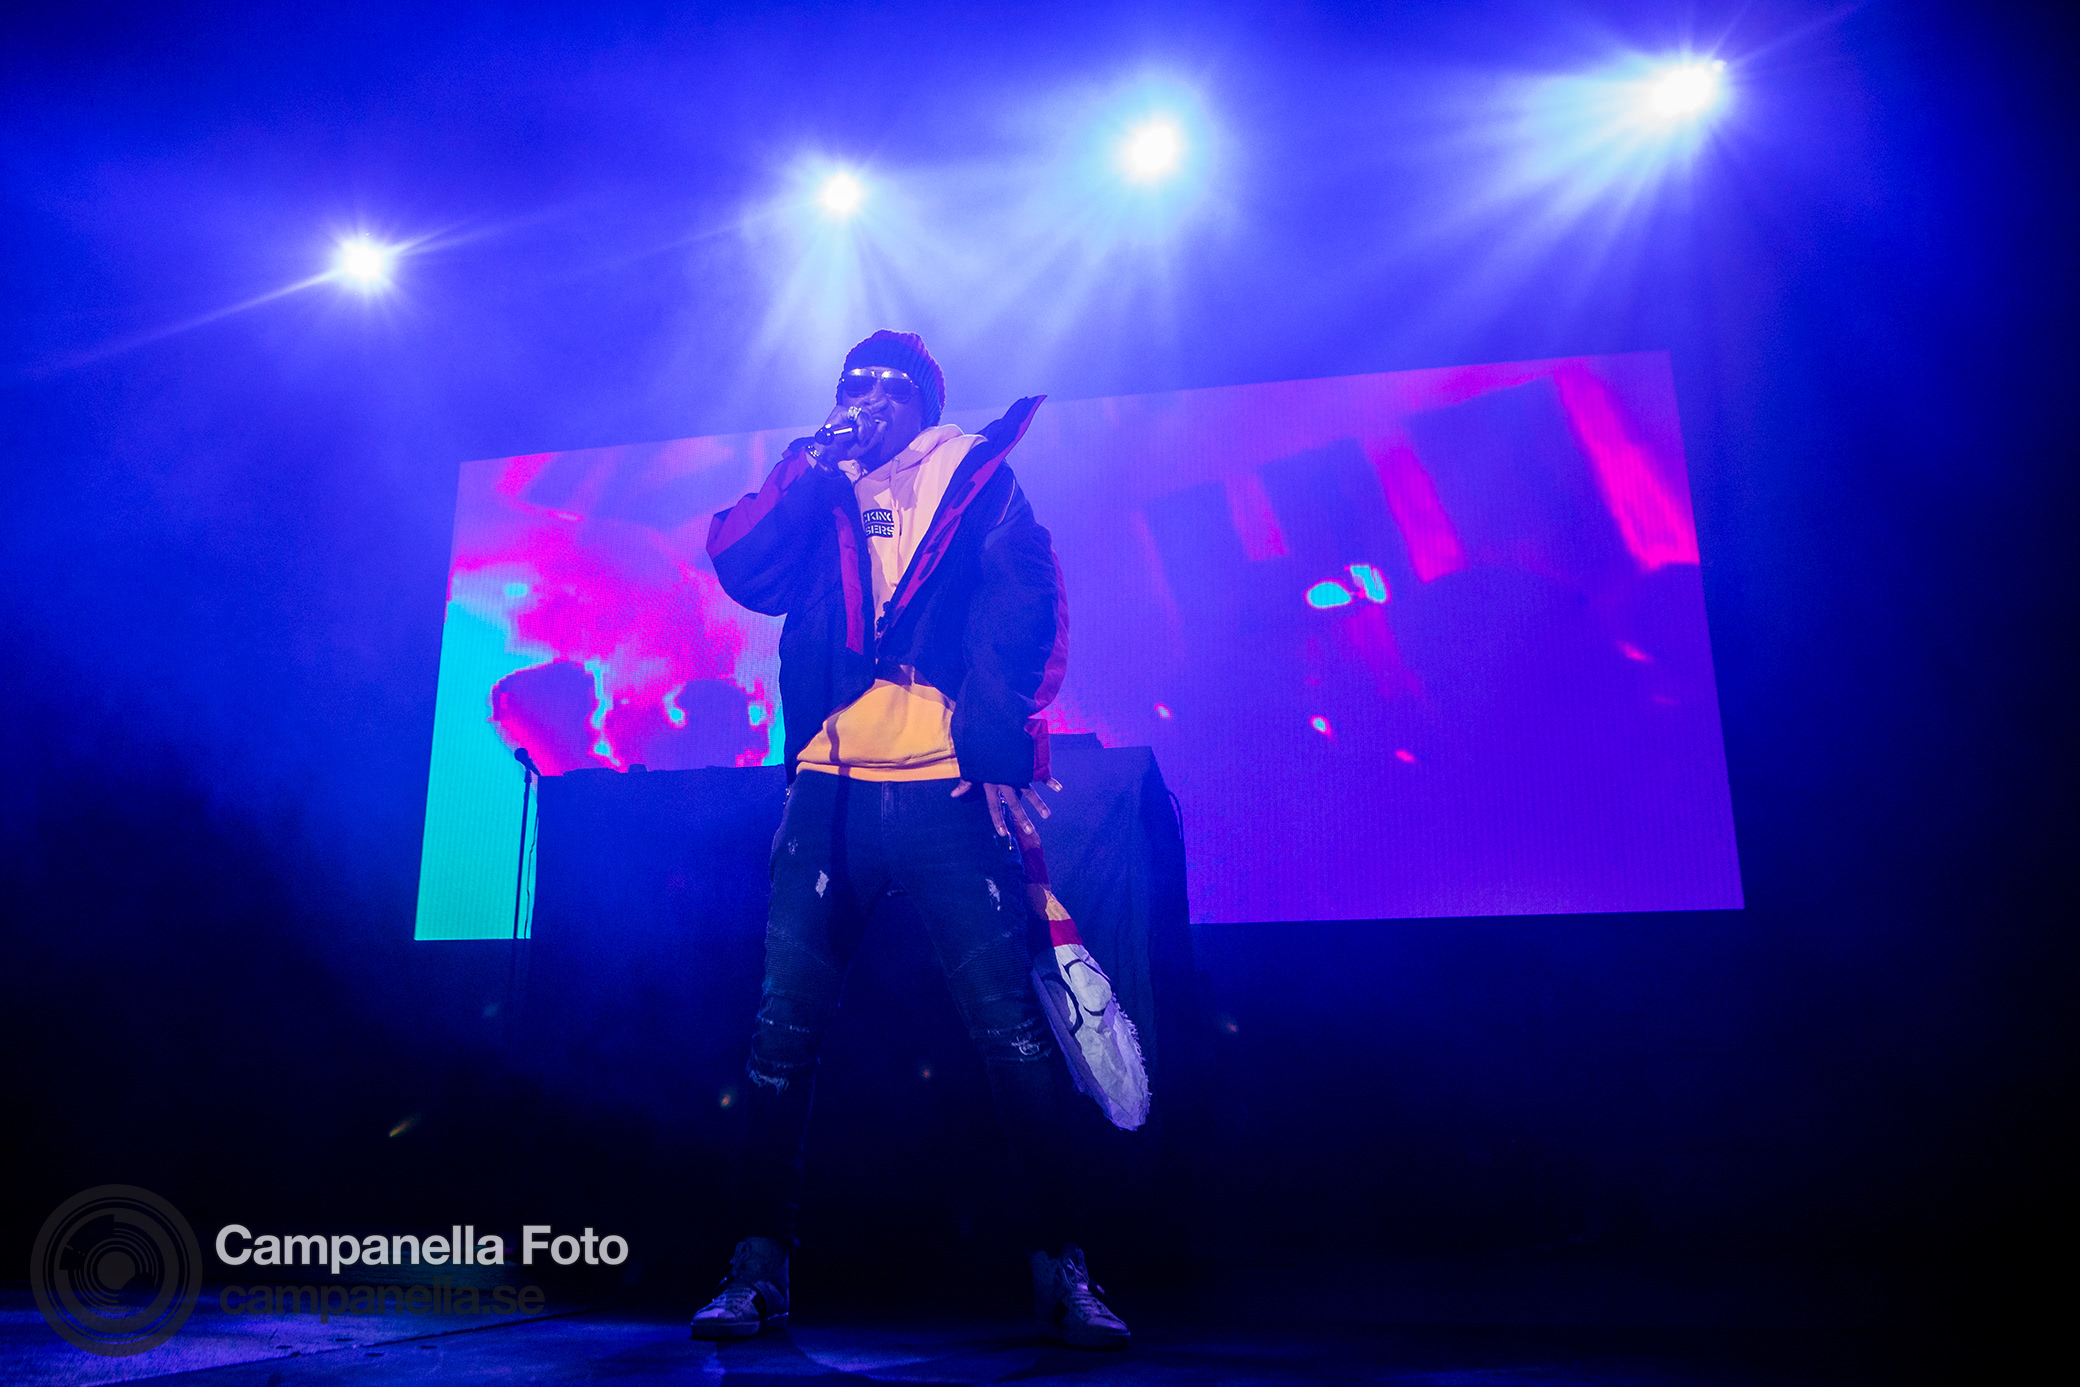 Future performs in Stockholm - Michael Campanella Photography